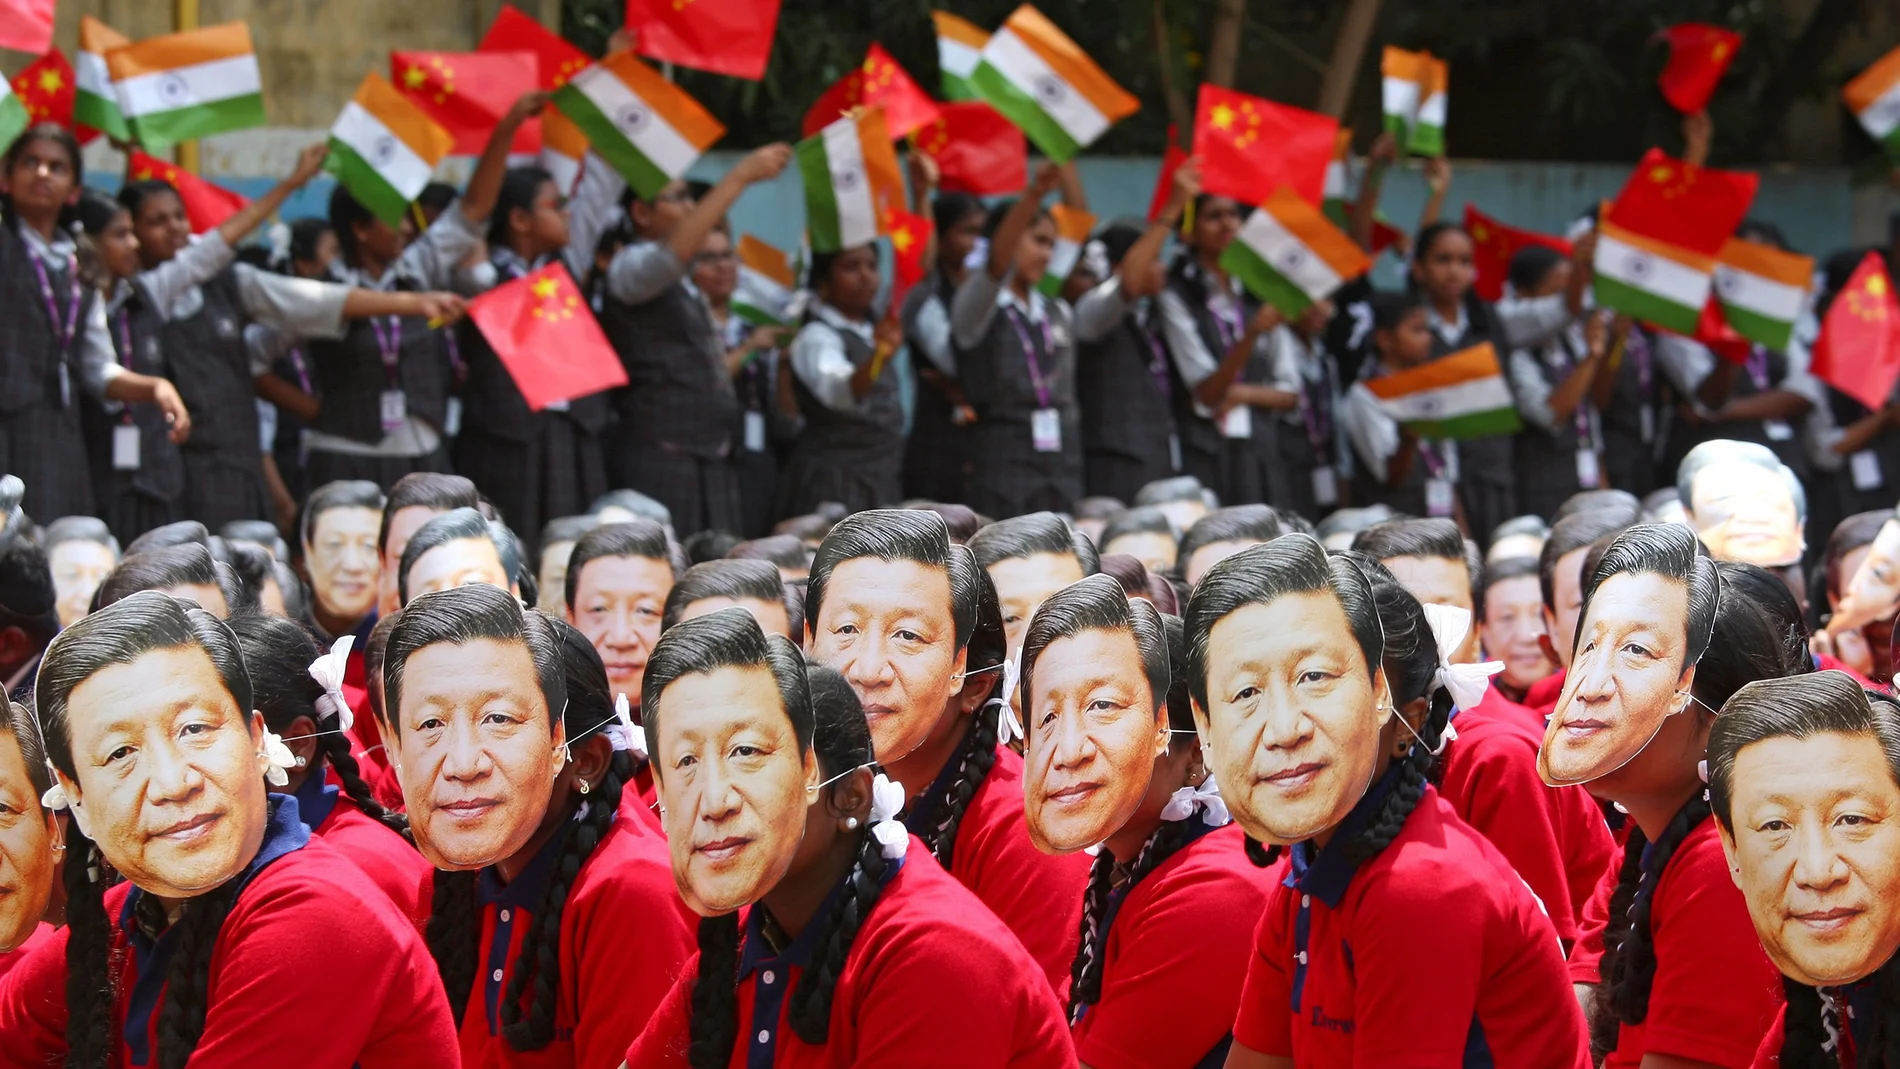 FILE PHOTO: Students wear masks of China's President Xi Jinping as other waves national flags of India and China, ahead of the informal summit with India?s Prime Minister Narendra Modi, at a school in Chennai